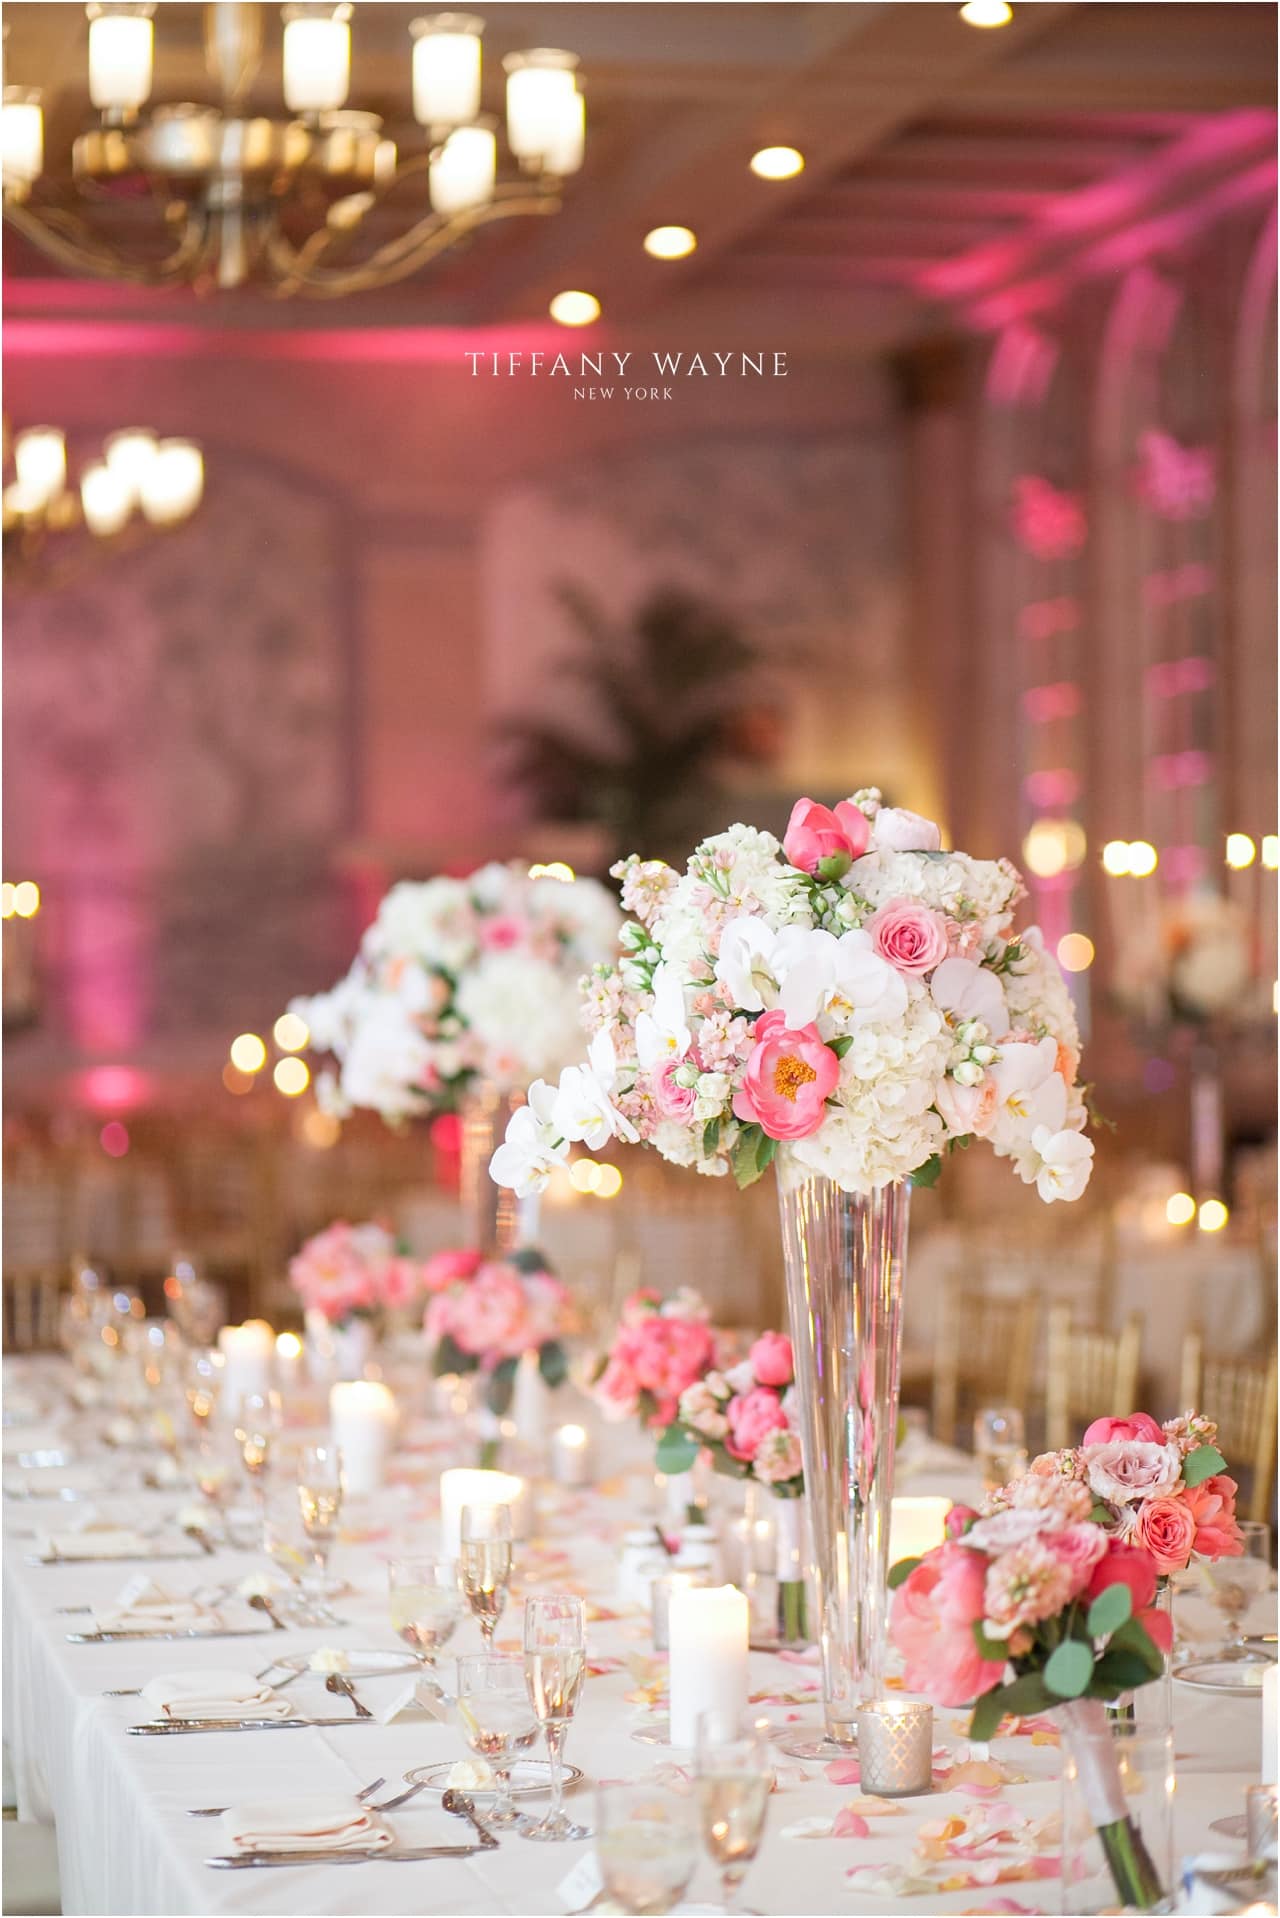 Franklin Plaza pink and white floral centerpieces